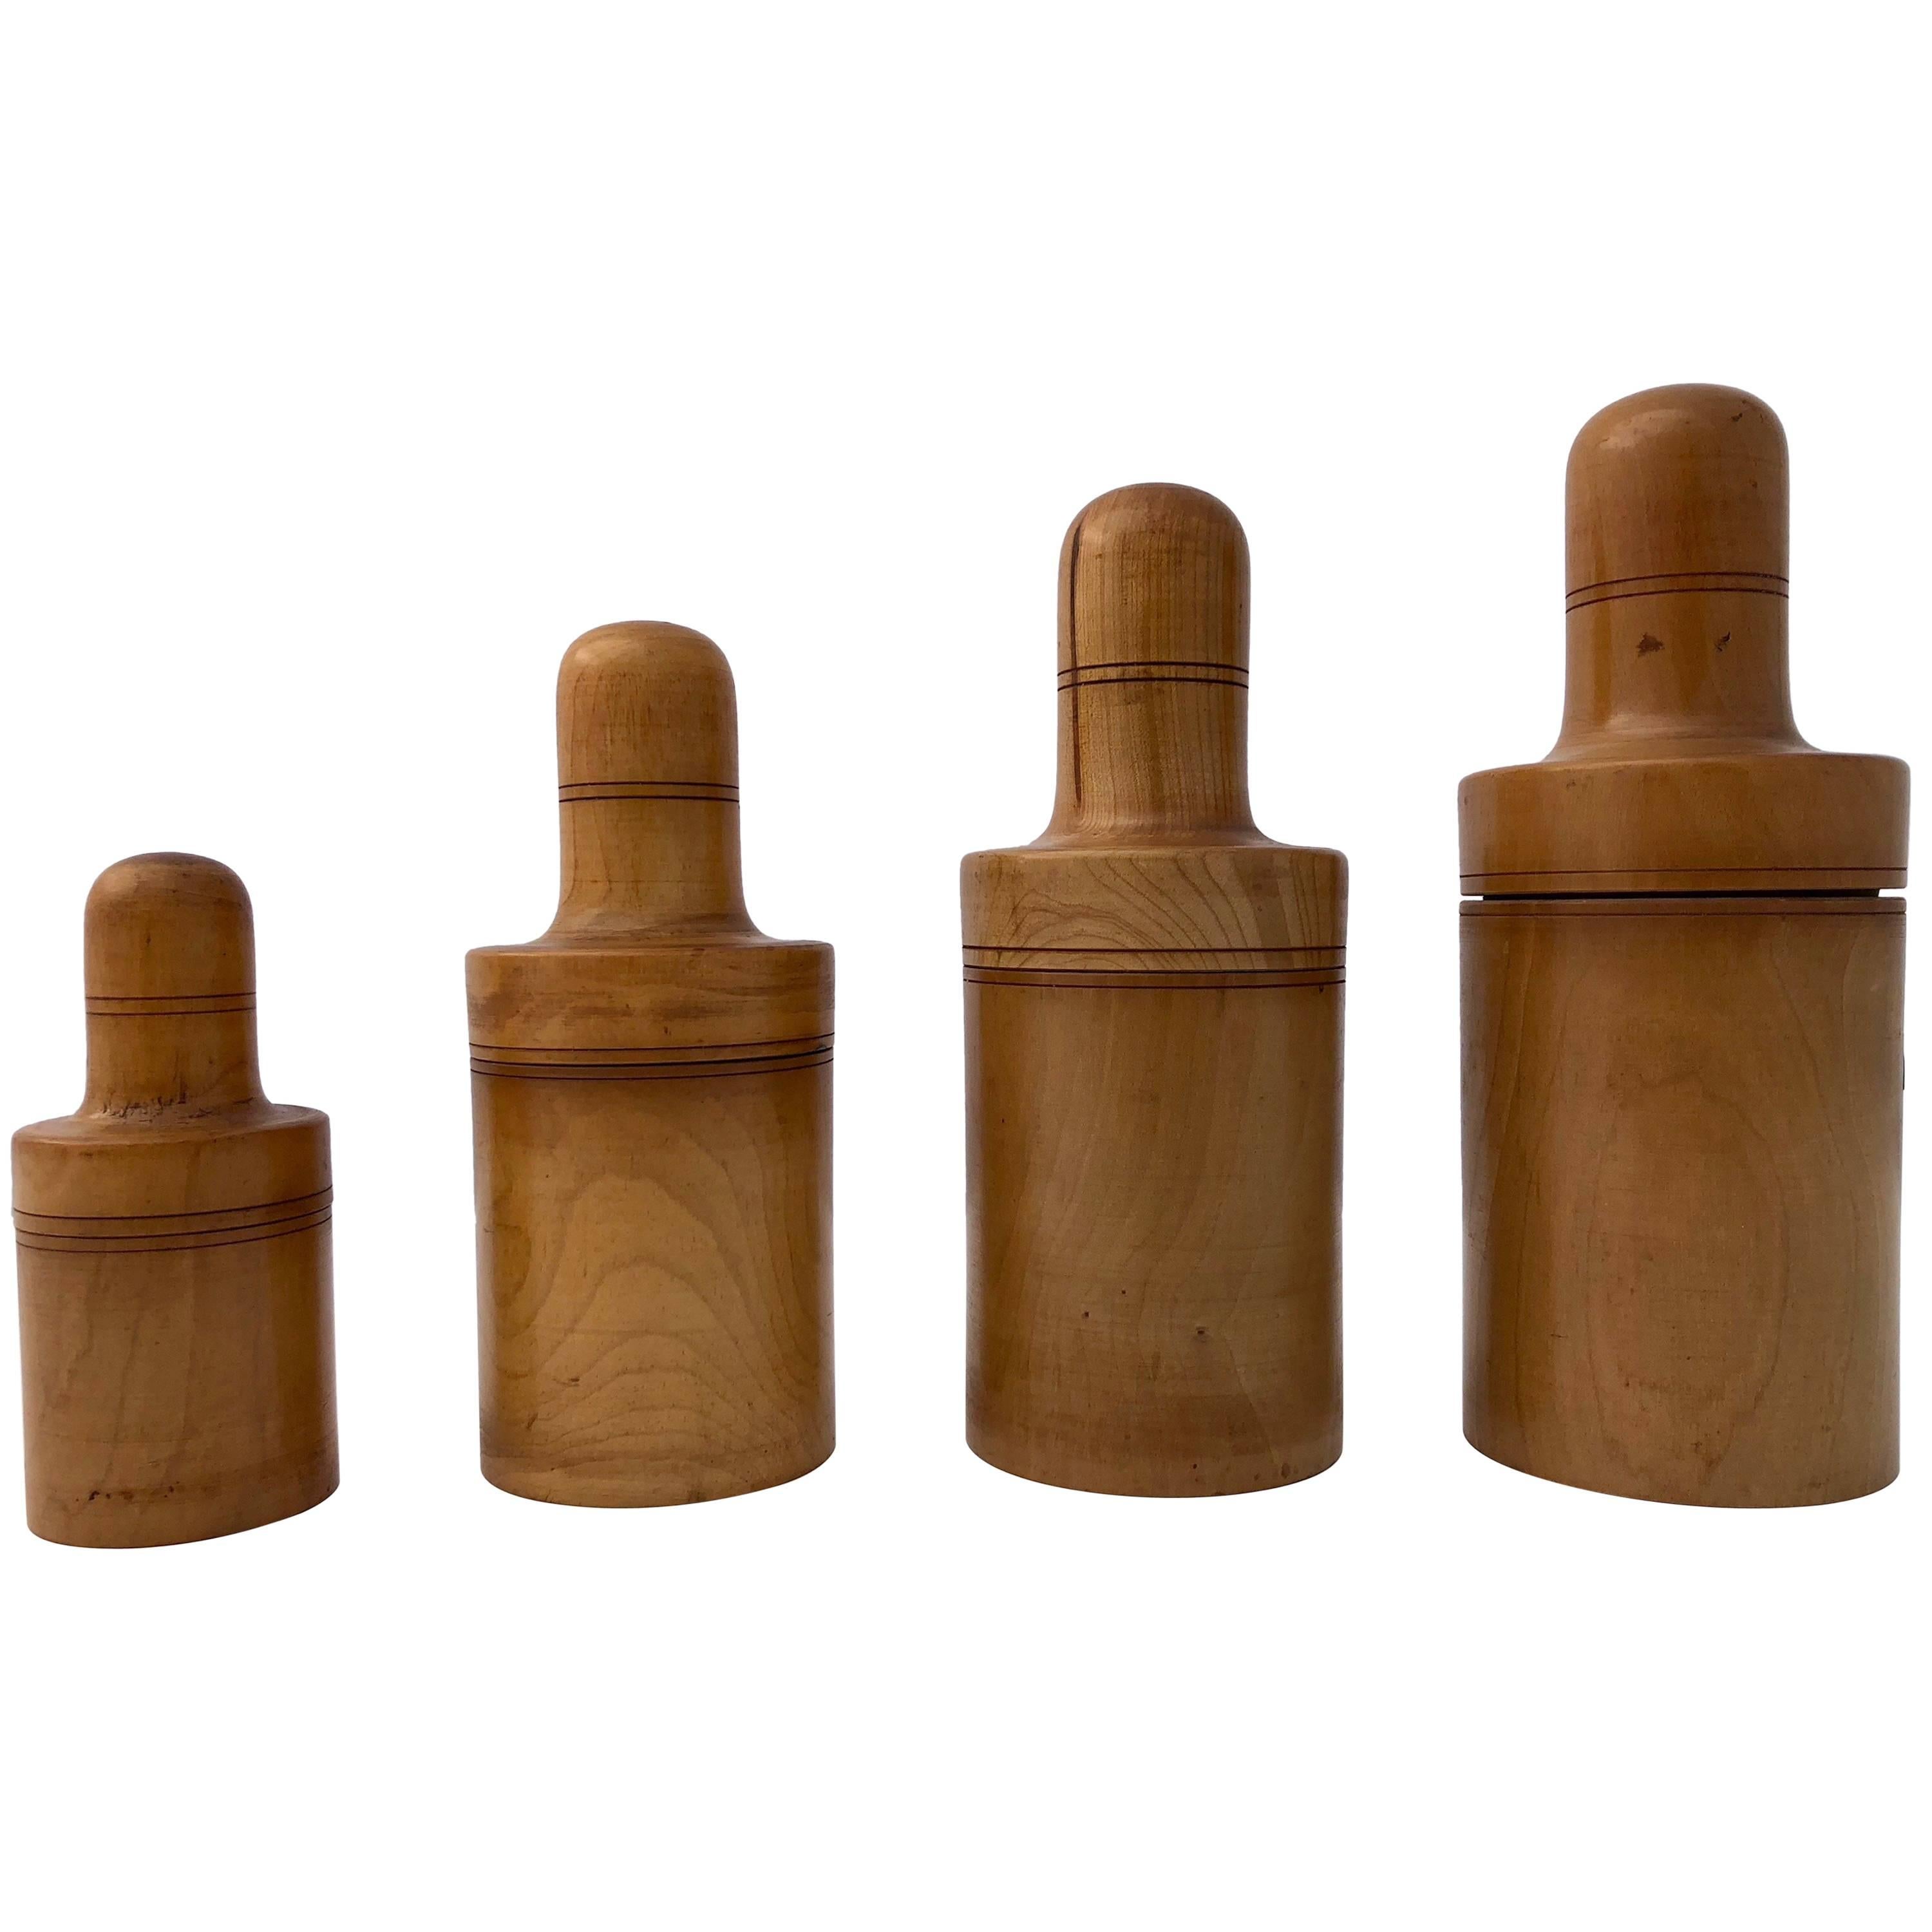 French Apothecary Boxwood Treen Boxes with Glass Bottles 1800s, 11 Pieces For Sale